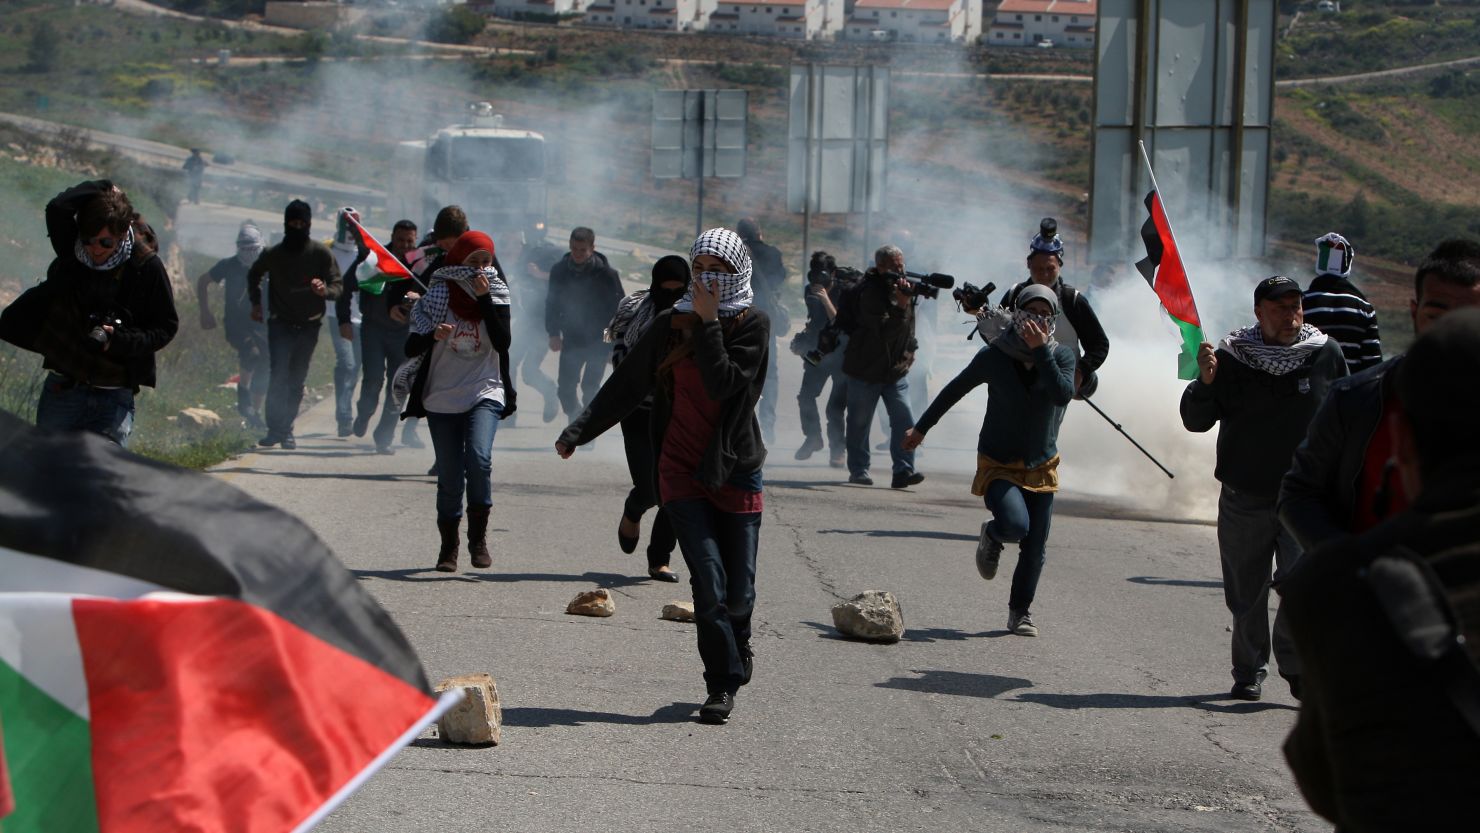 Tear gas on Friday scatters Palestinians protesting the seizure of land for a Jewish settlement near Ramallah in the West Bank.